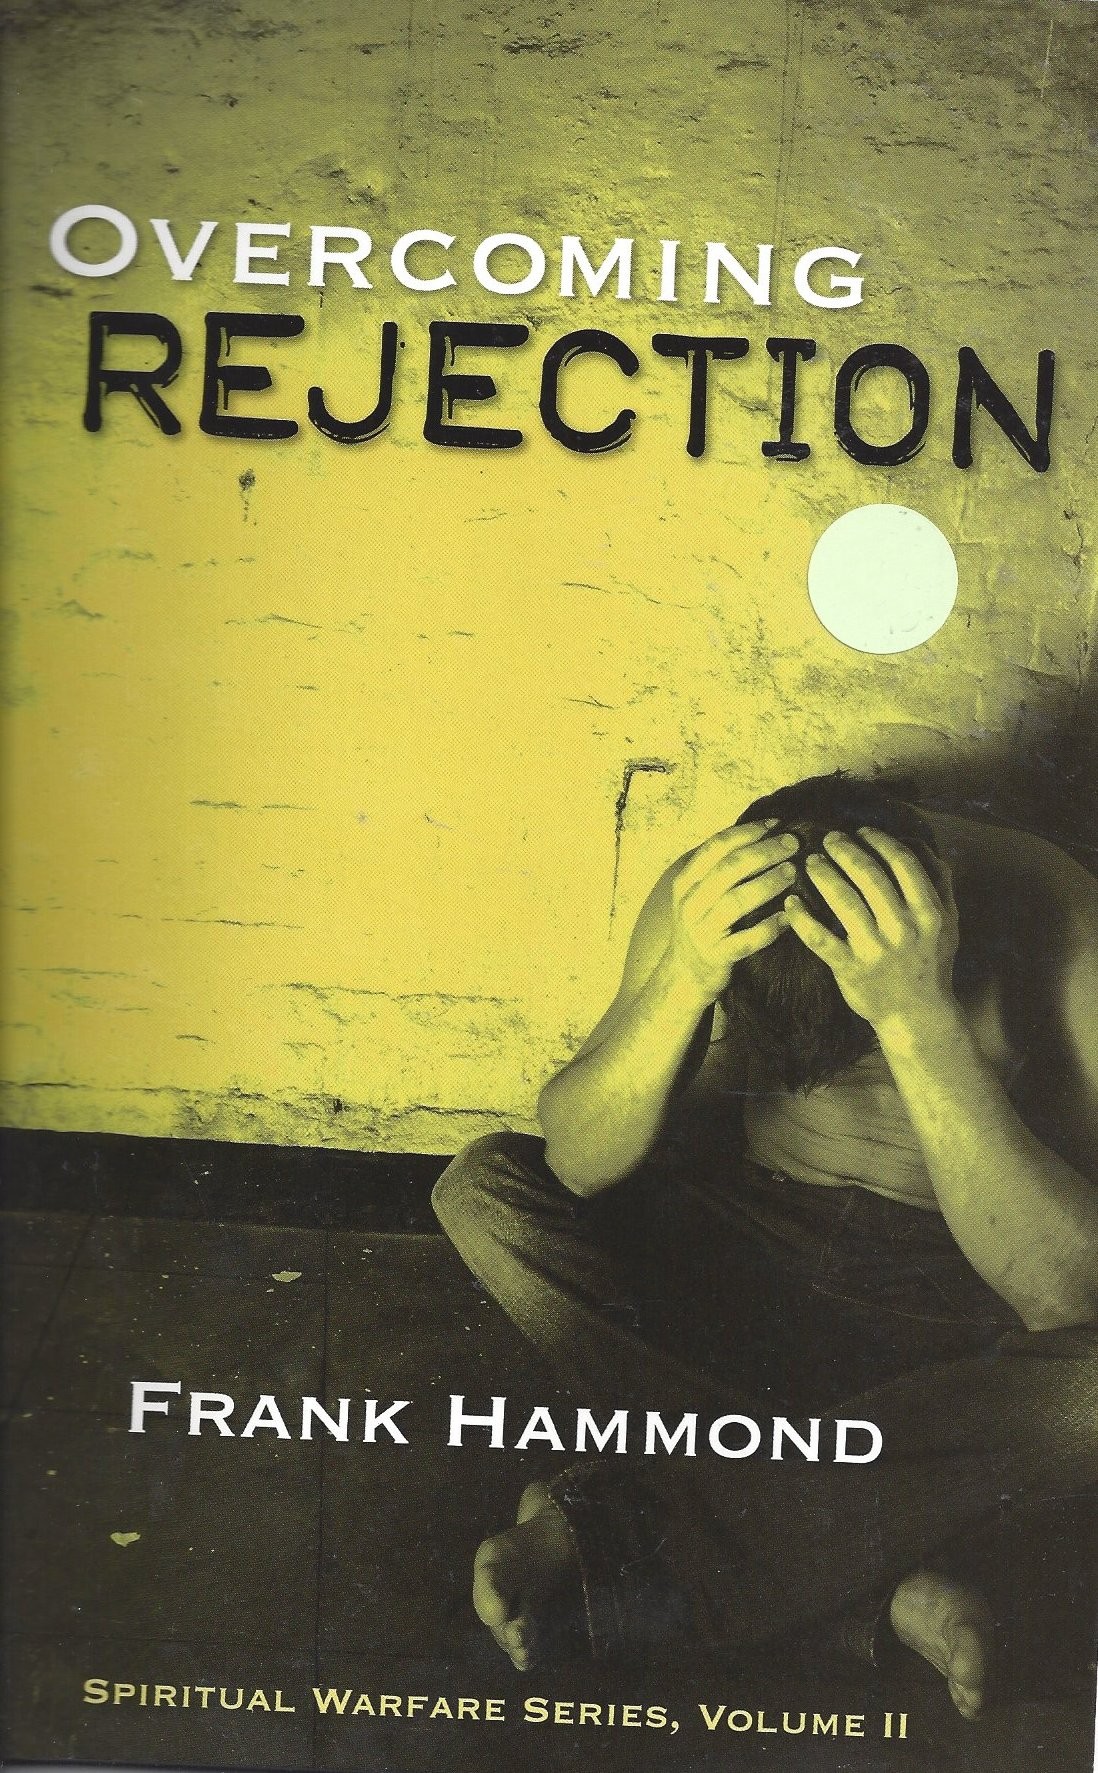 Overcoming Rejection  (1987)  Front